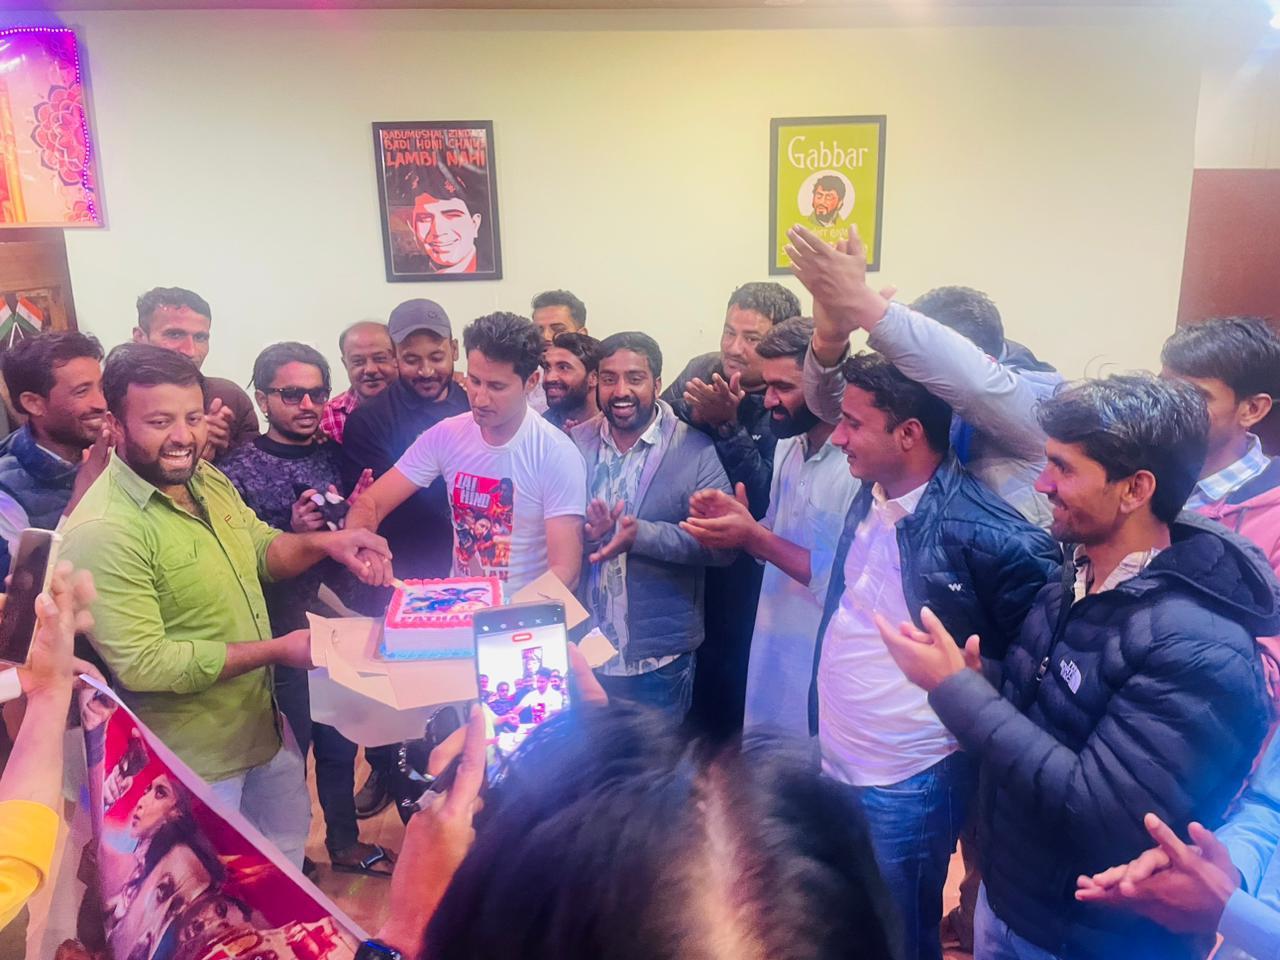 While pan-India films have been the norm in the last few years, superstar Shah Rukh Khan's film saw a pan-India celebration. Fans of the star from across the country not only watched the film on its release day but celebrated the film with cakes, firecrackers and garlanding on life-sized posters of the King. The fans truly gave a King's welcome to Khan